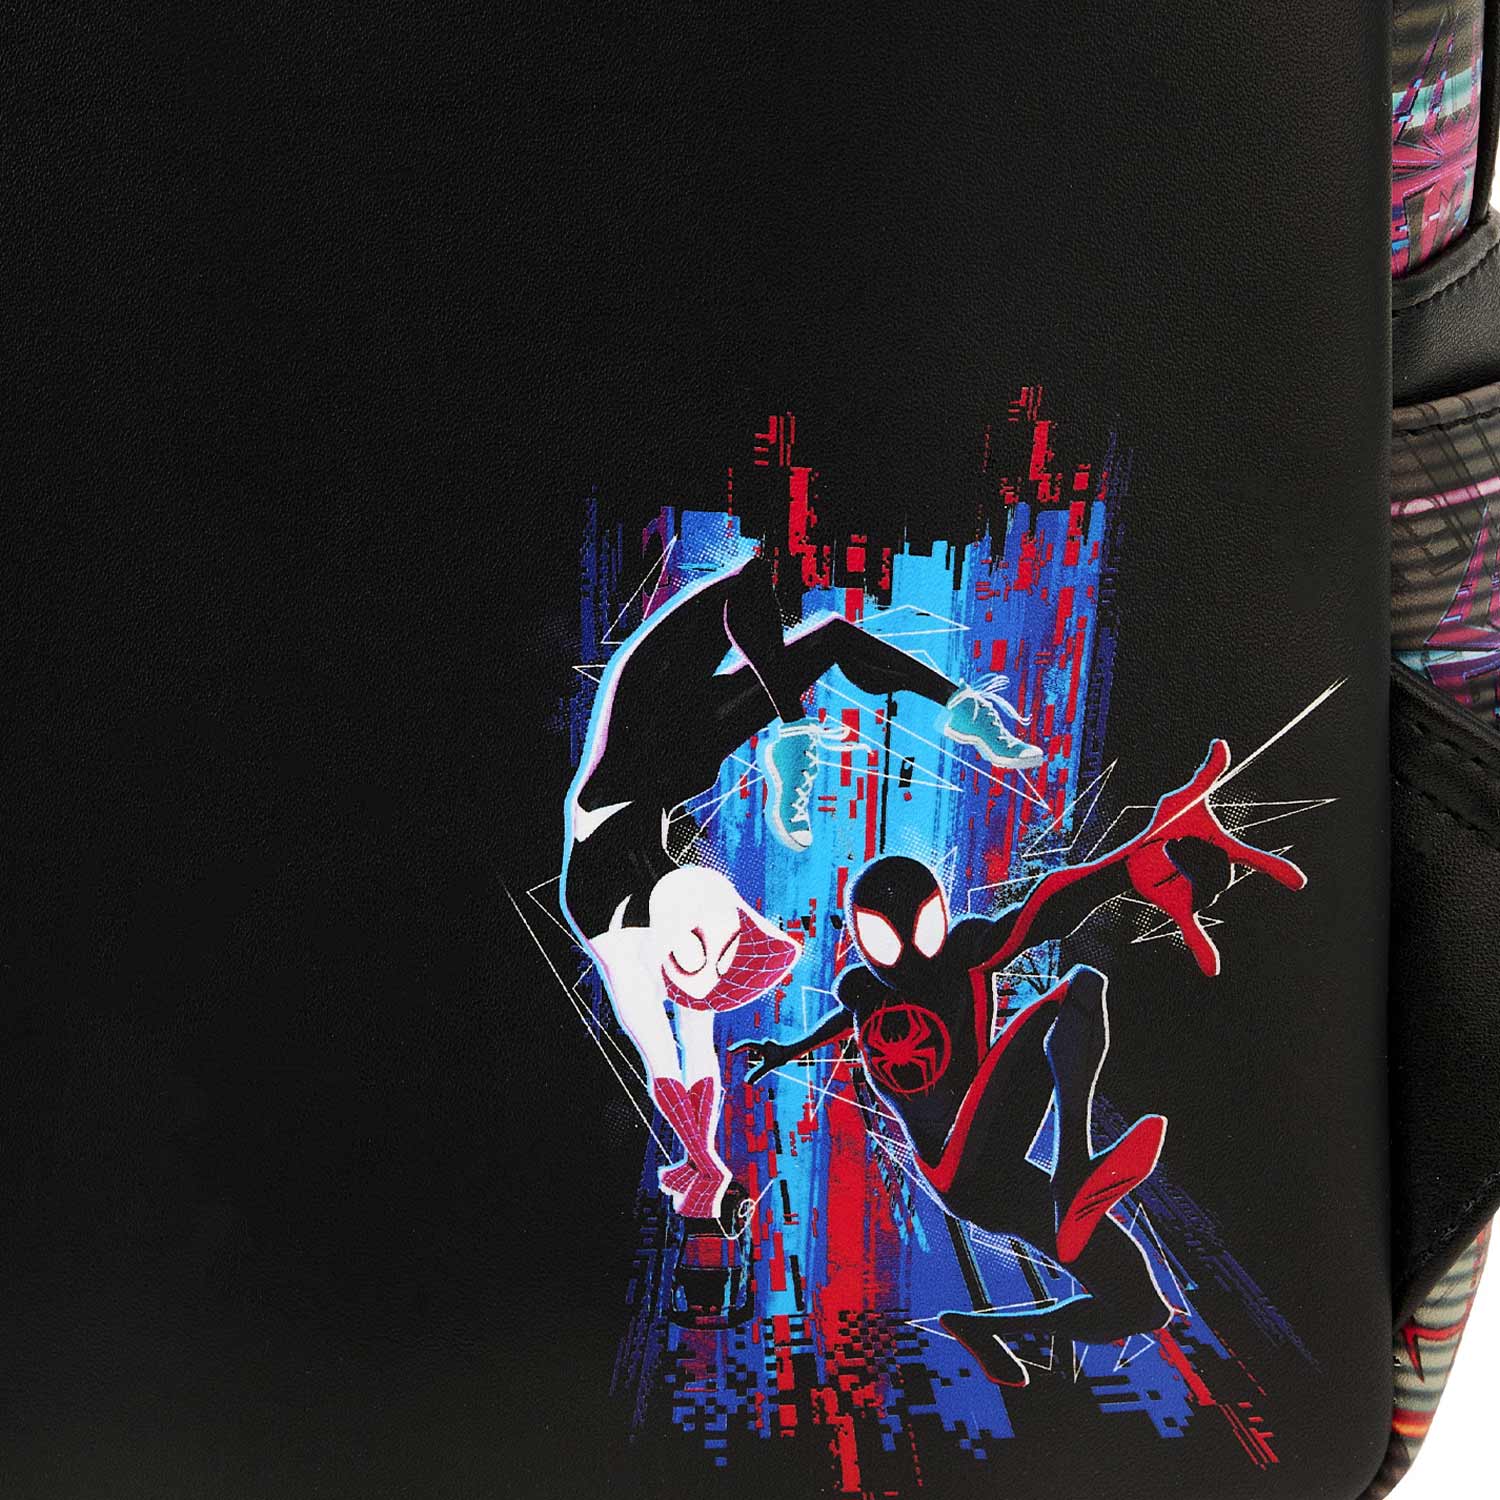 Loungefly x Marvel Across The Spiderverse Mini Backpack - GeekCore